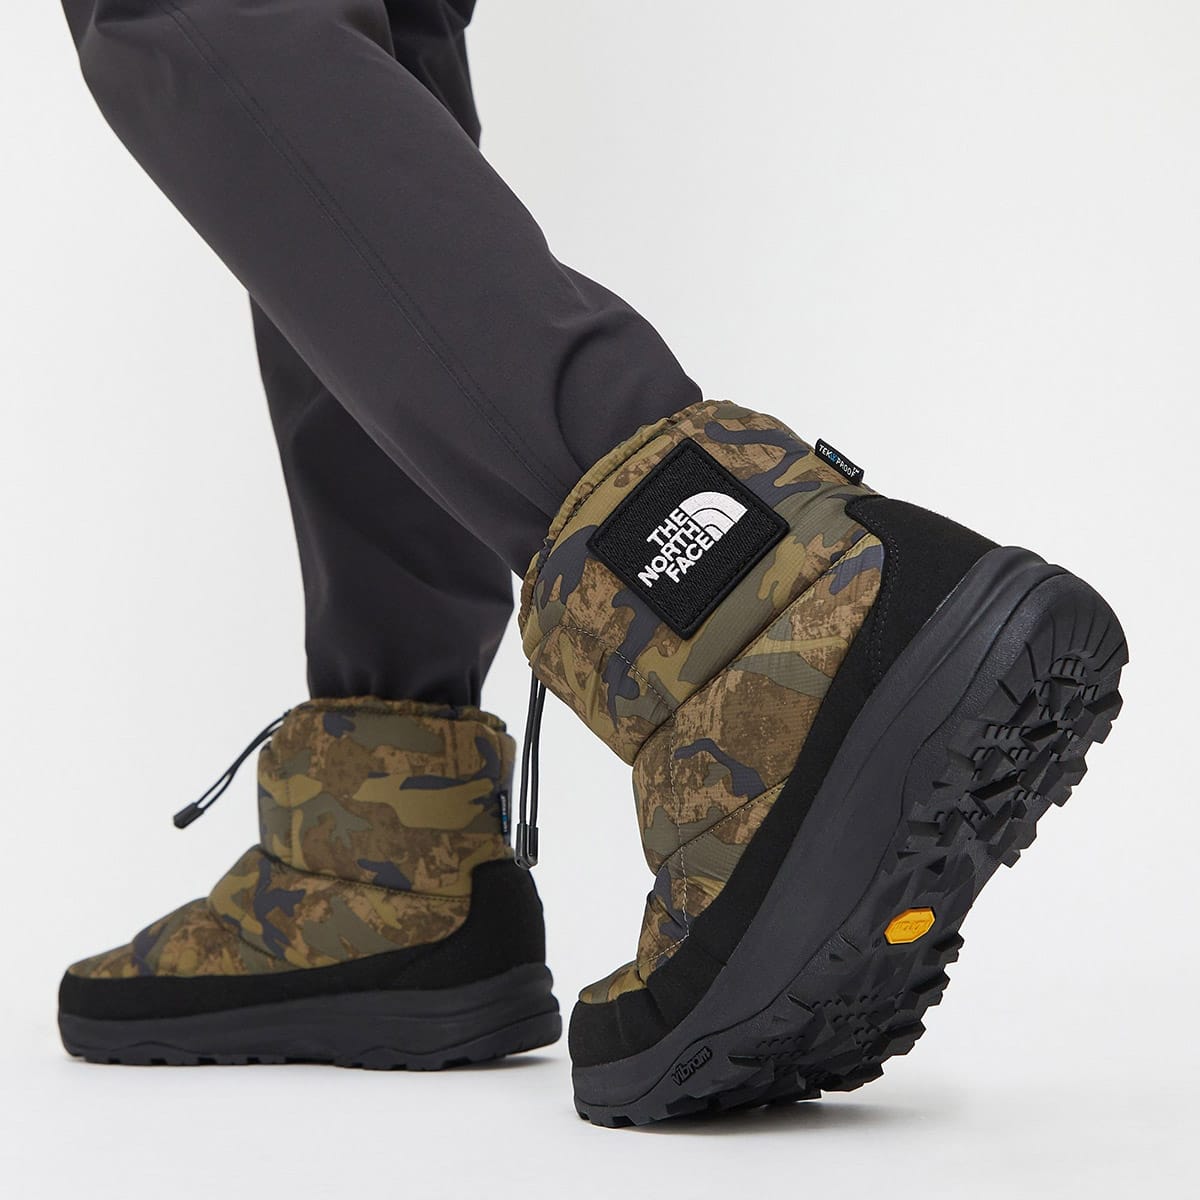 THE NORTH FACE♤Nuptse Bootie カモビームス - ブーツ